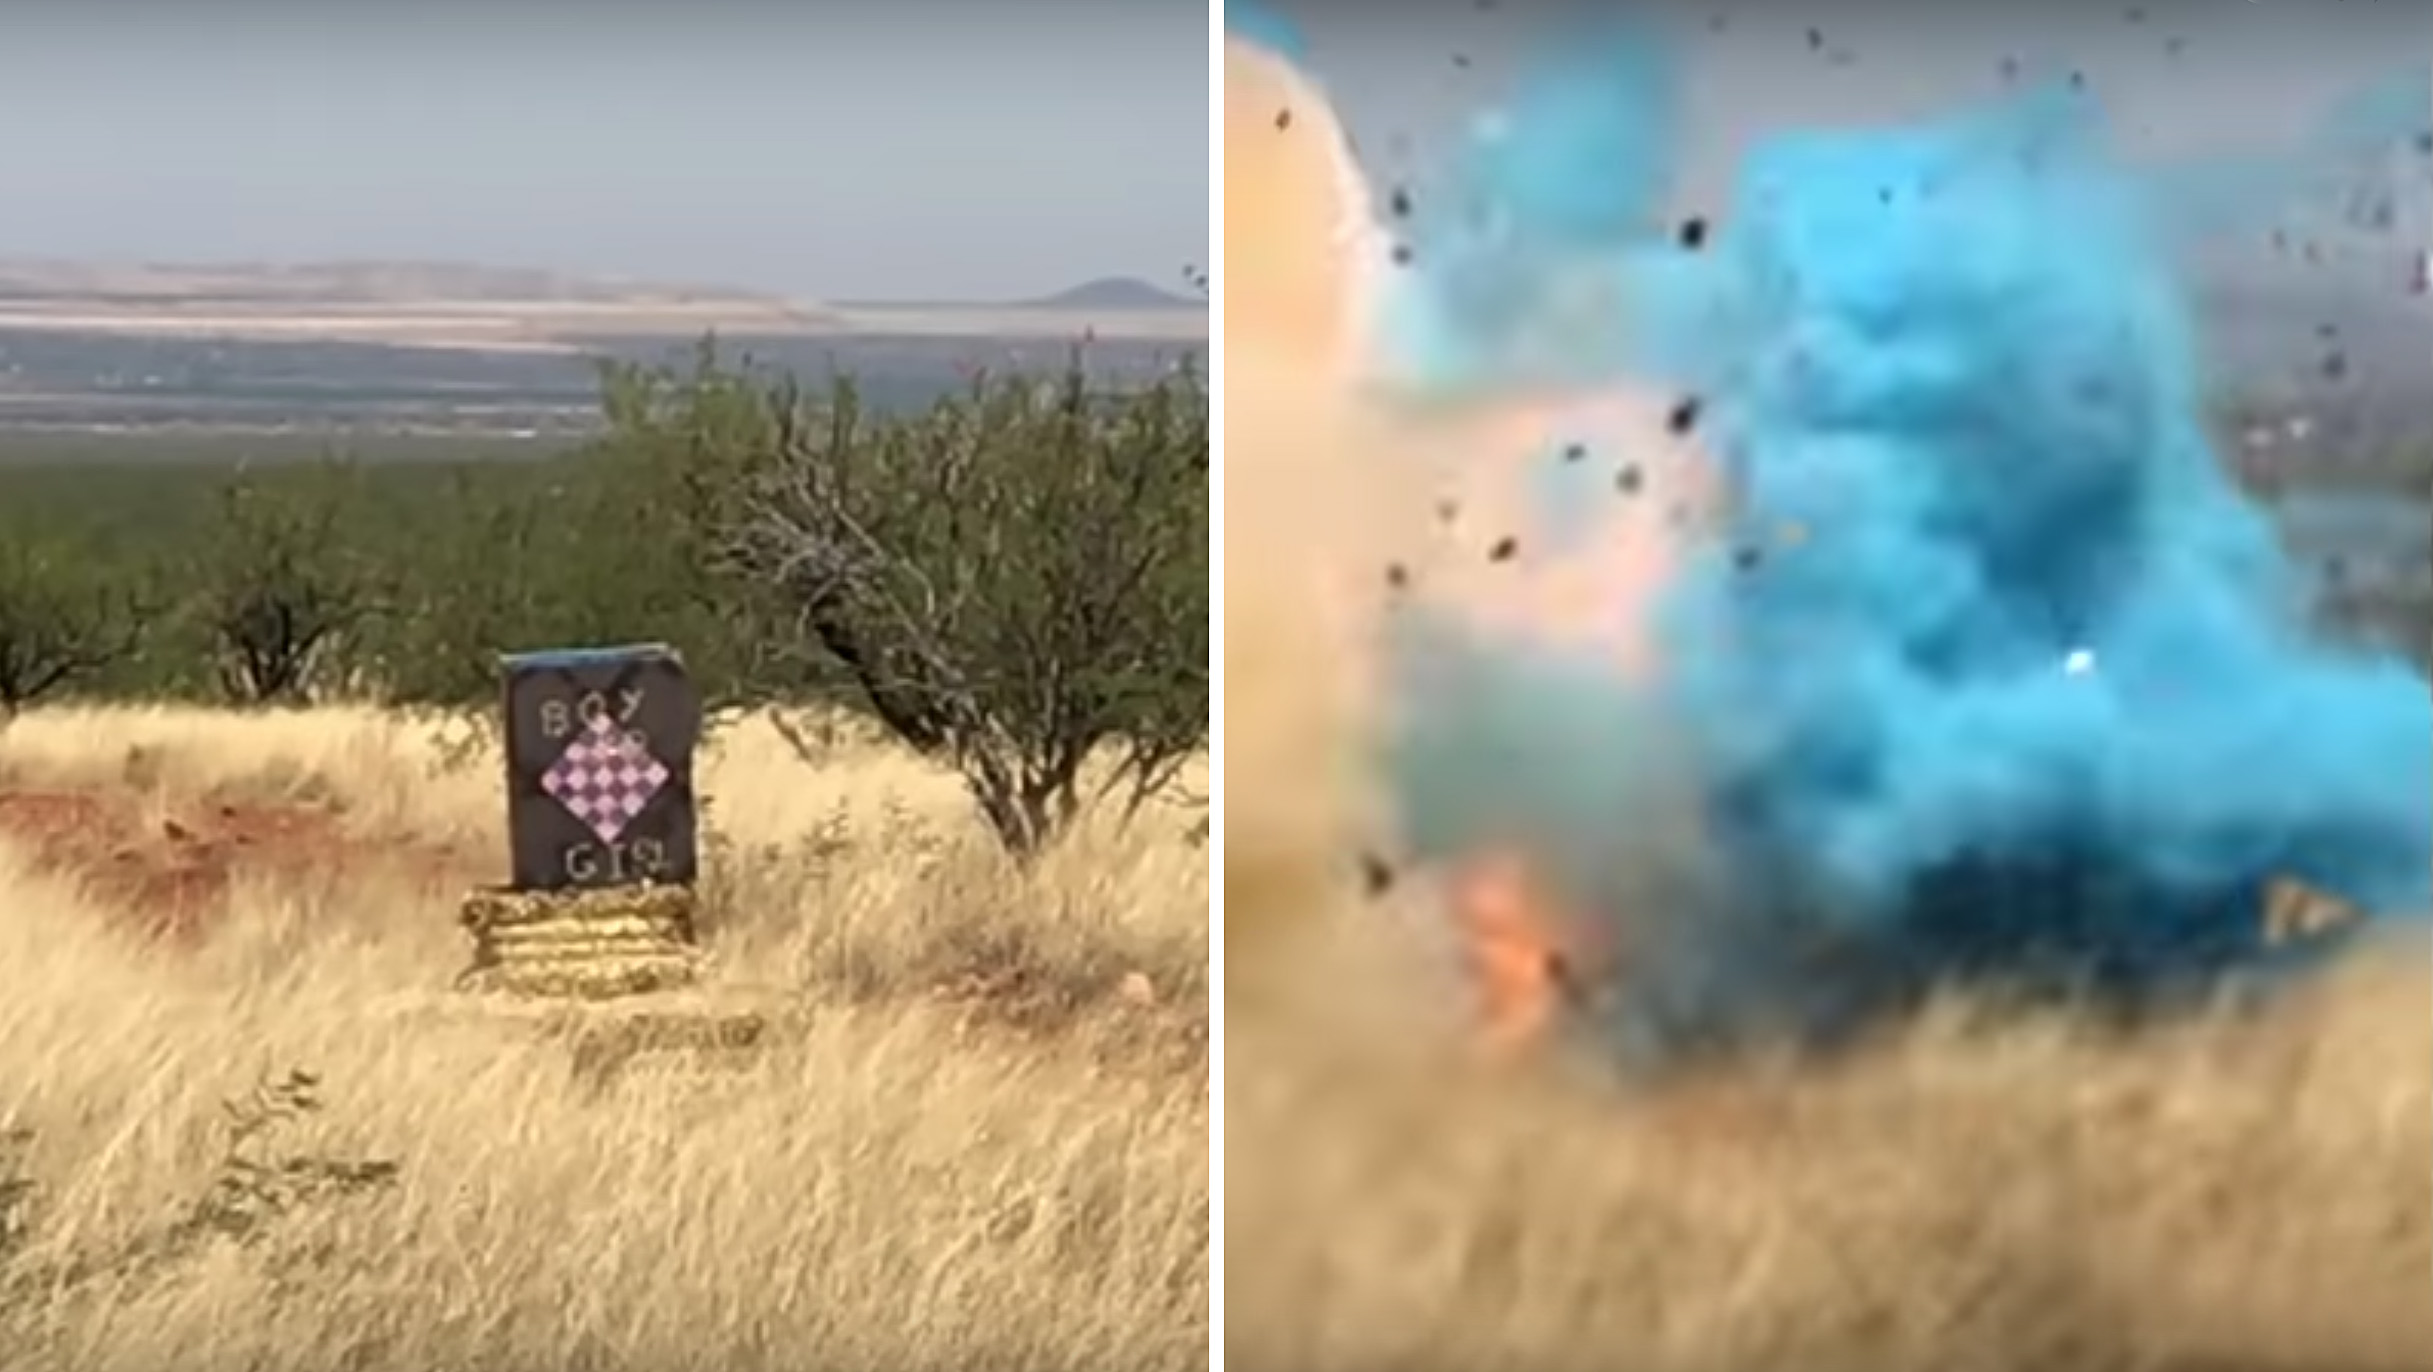 Video Shows Gender Reveal Explosion That Sparked Sawmill Wildfire The